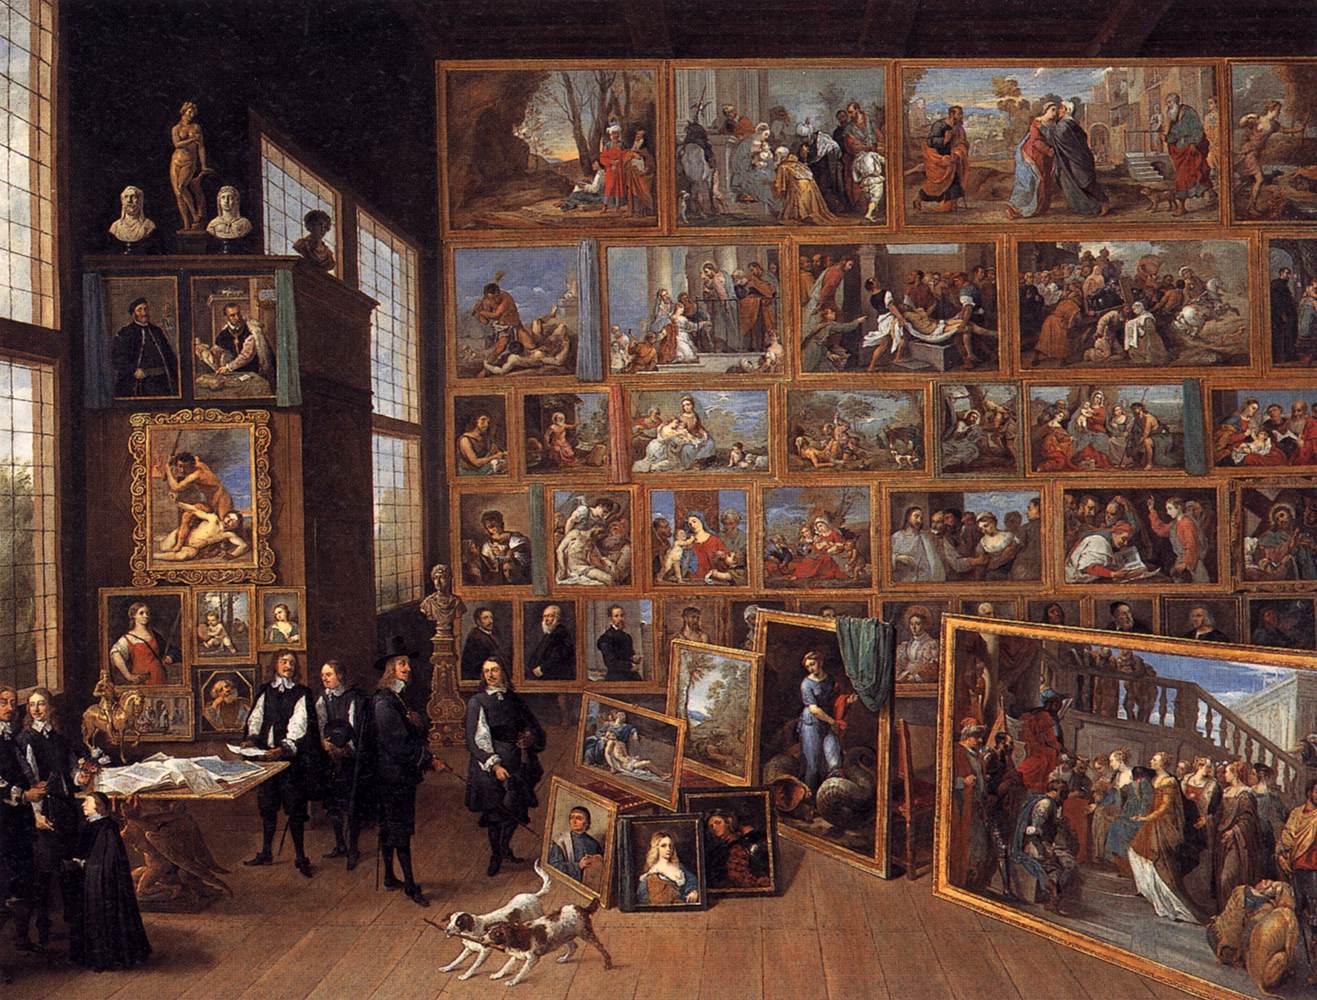 The Archduke Leopold Wilhelm Art Collection in Brussels